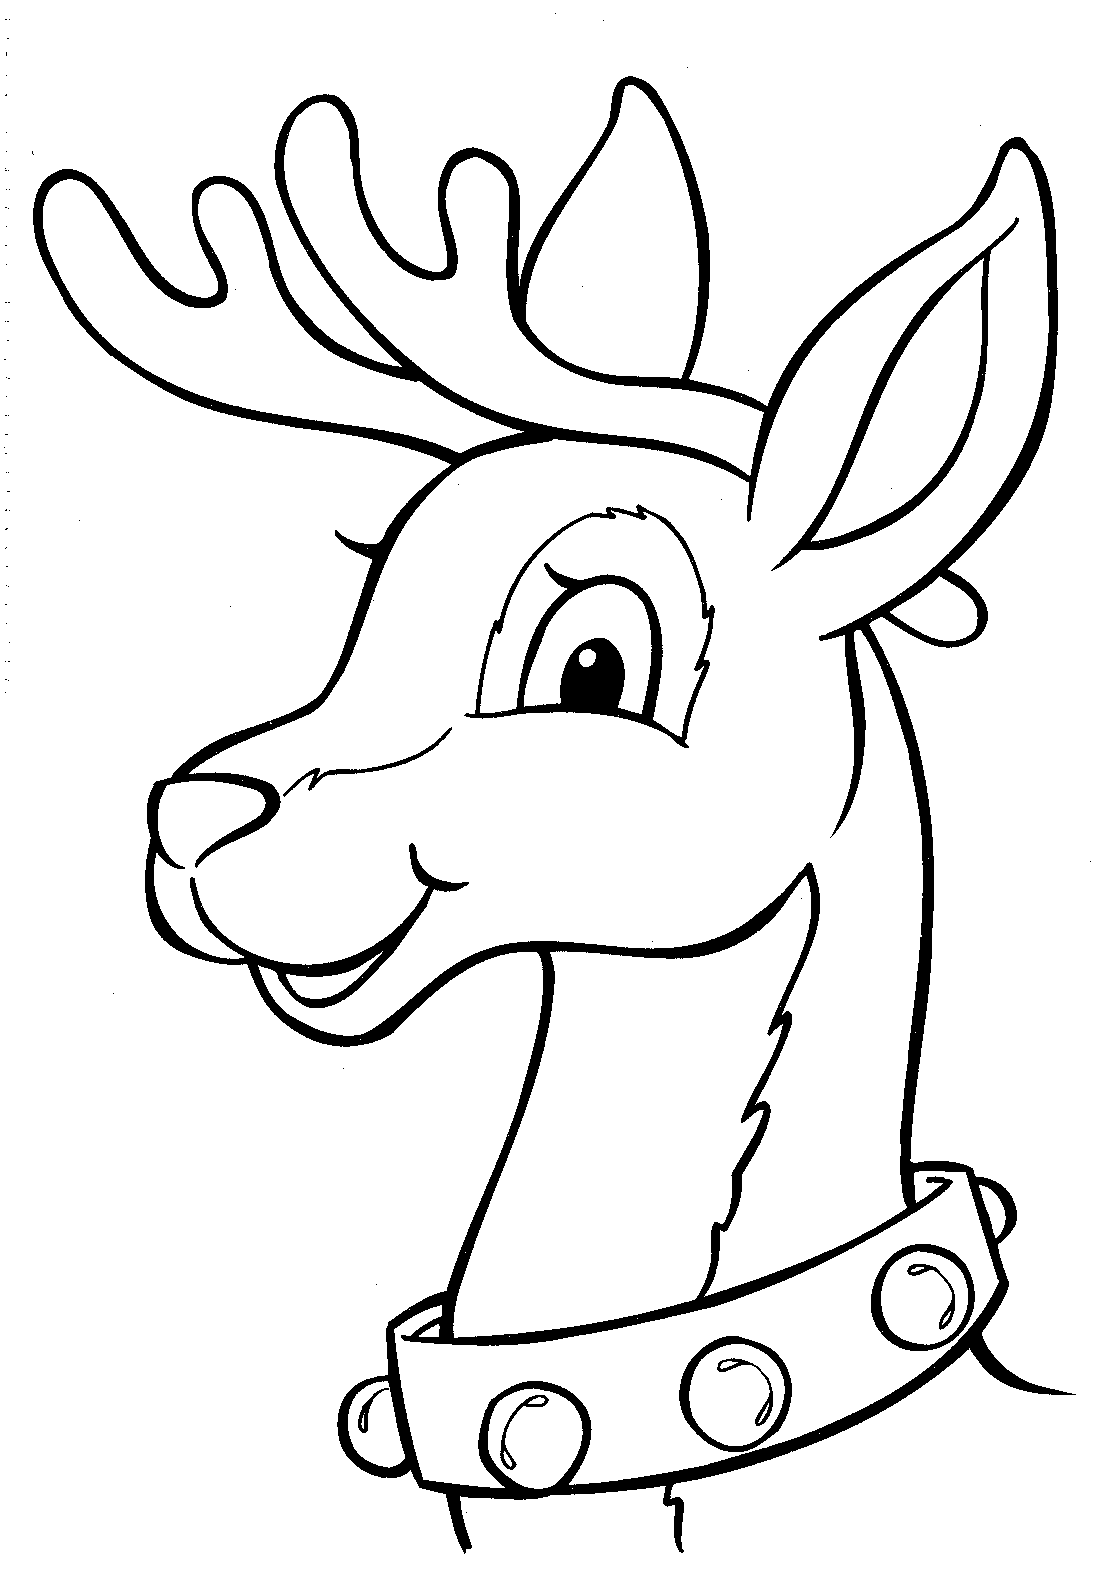 Christmas Ornaments Coloring Pages Printable - Coloring Home